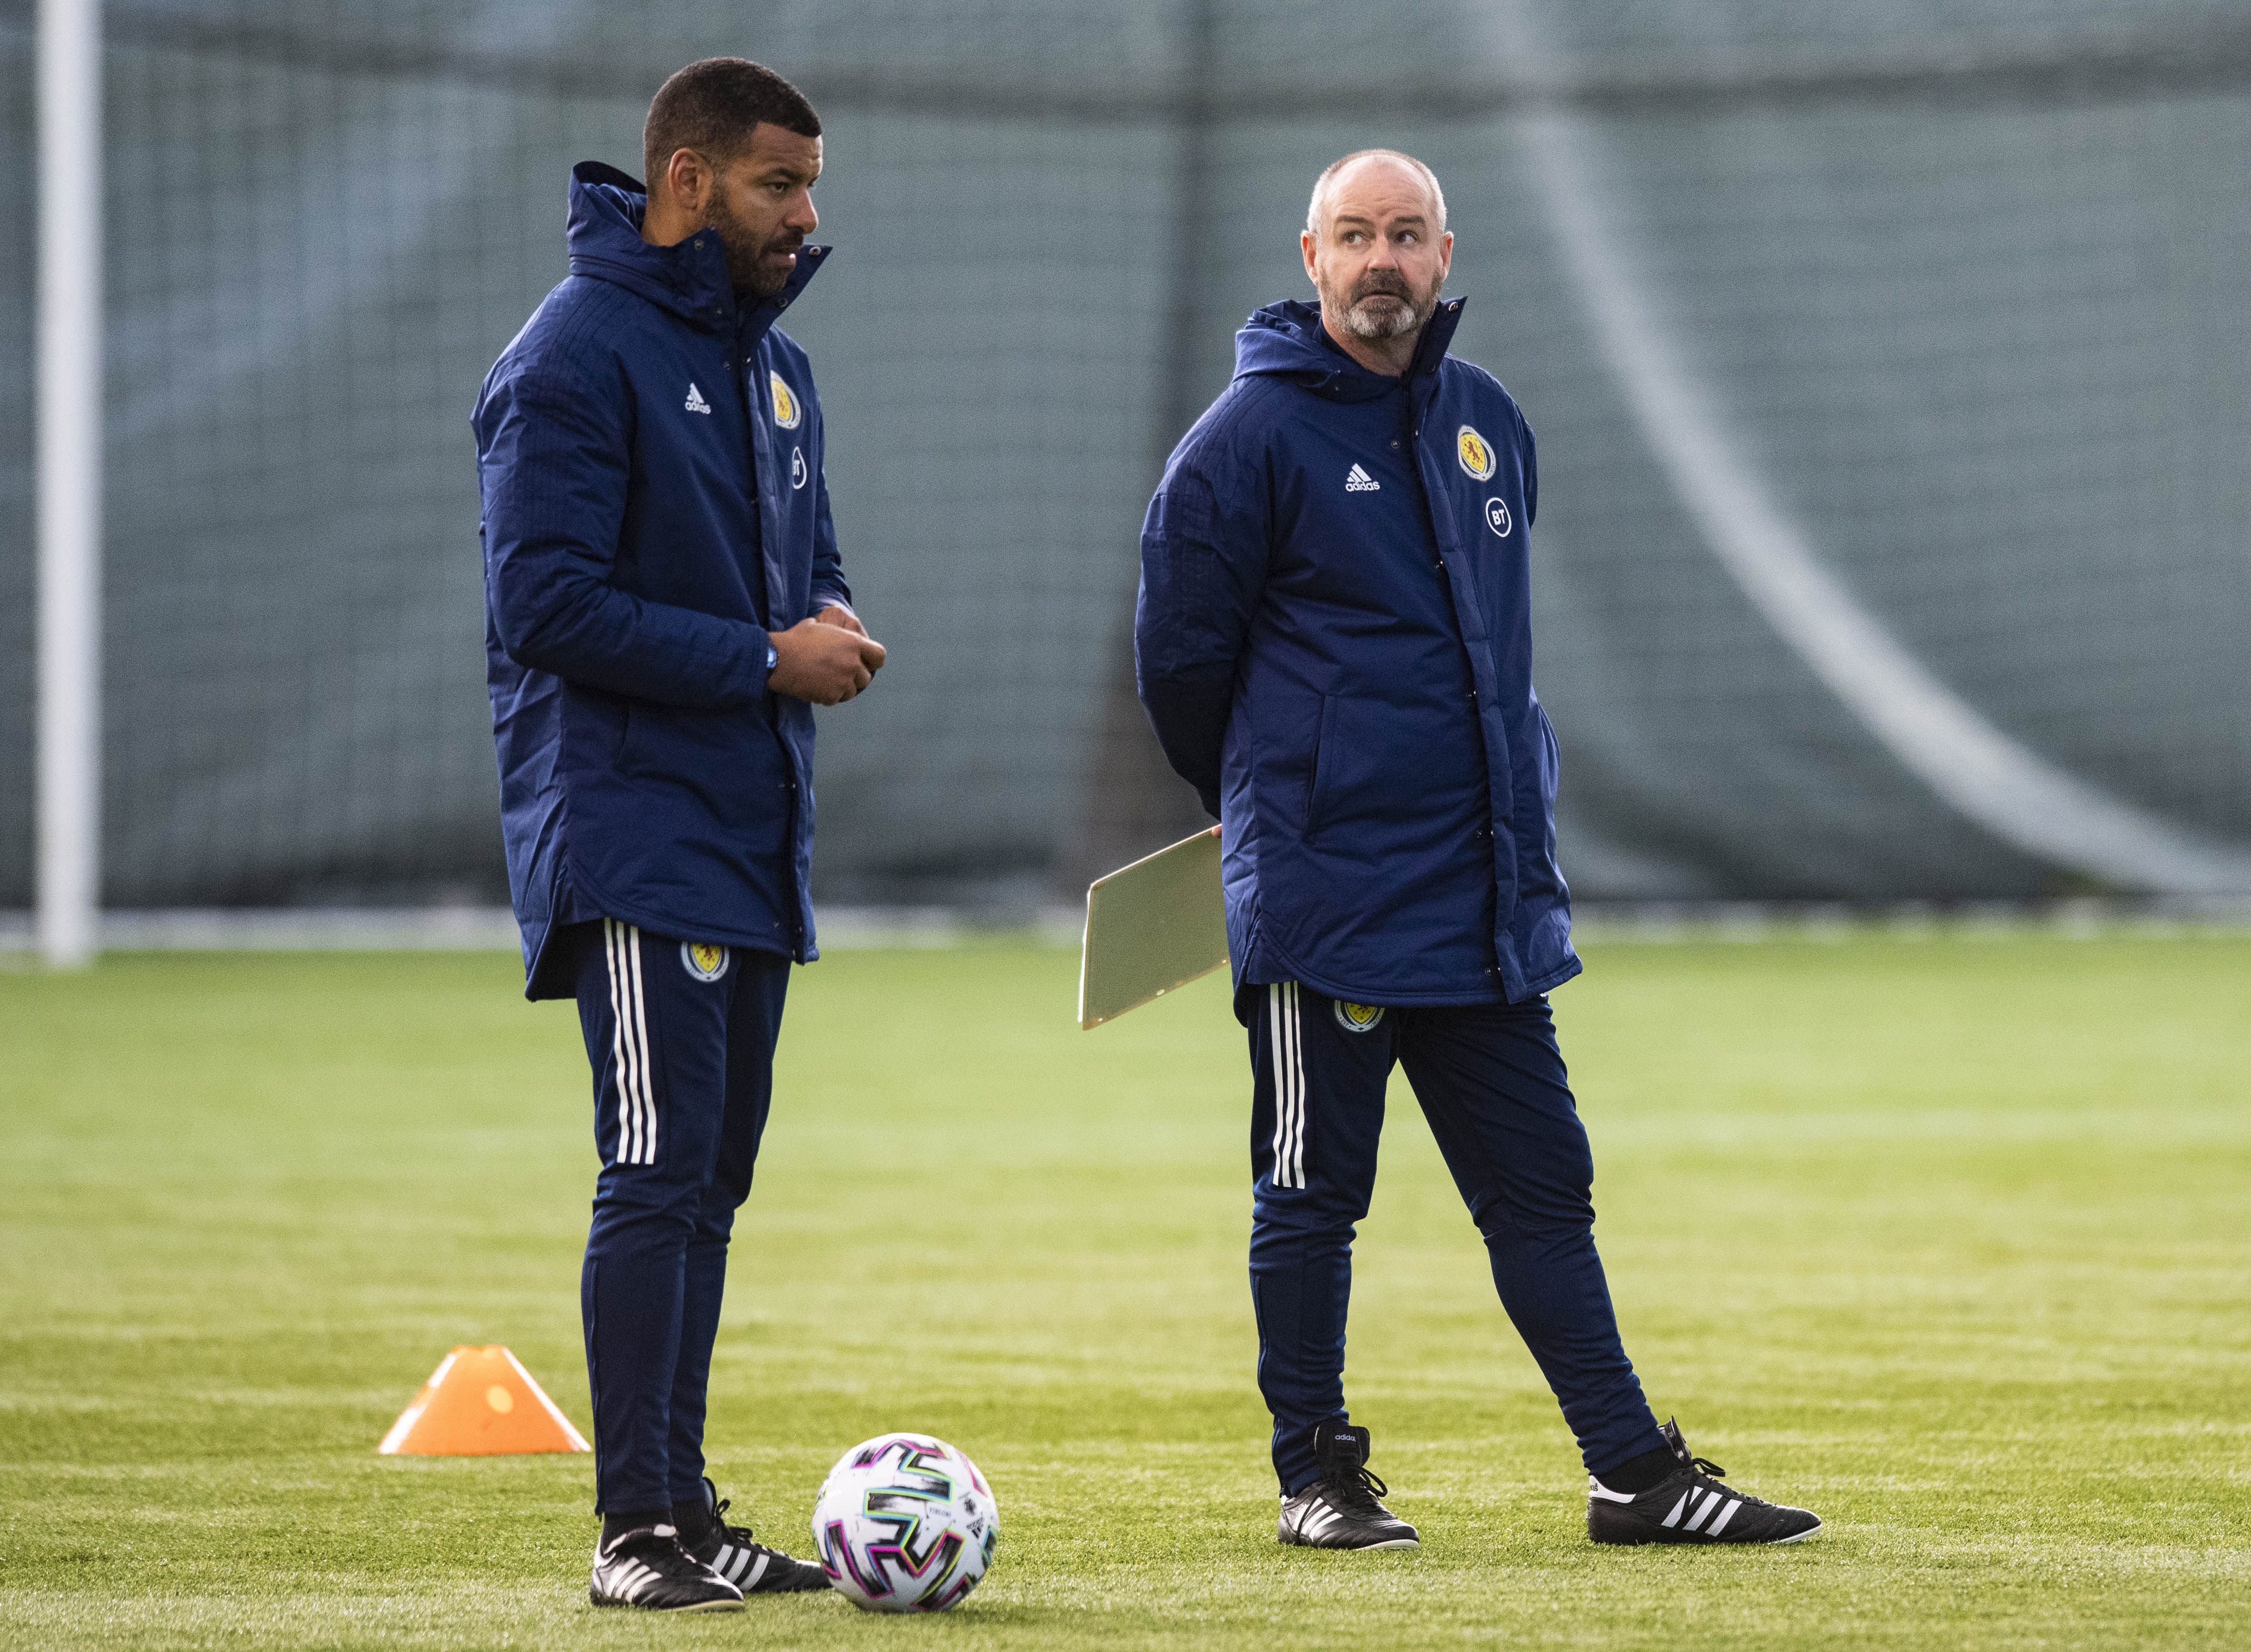 Clarke and Reid talk tactics during a Scotland training session.